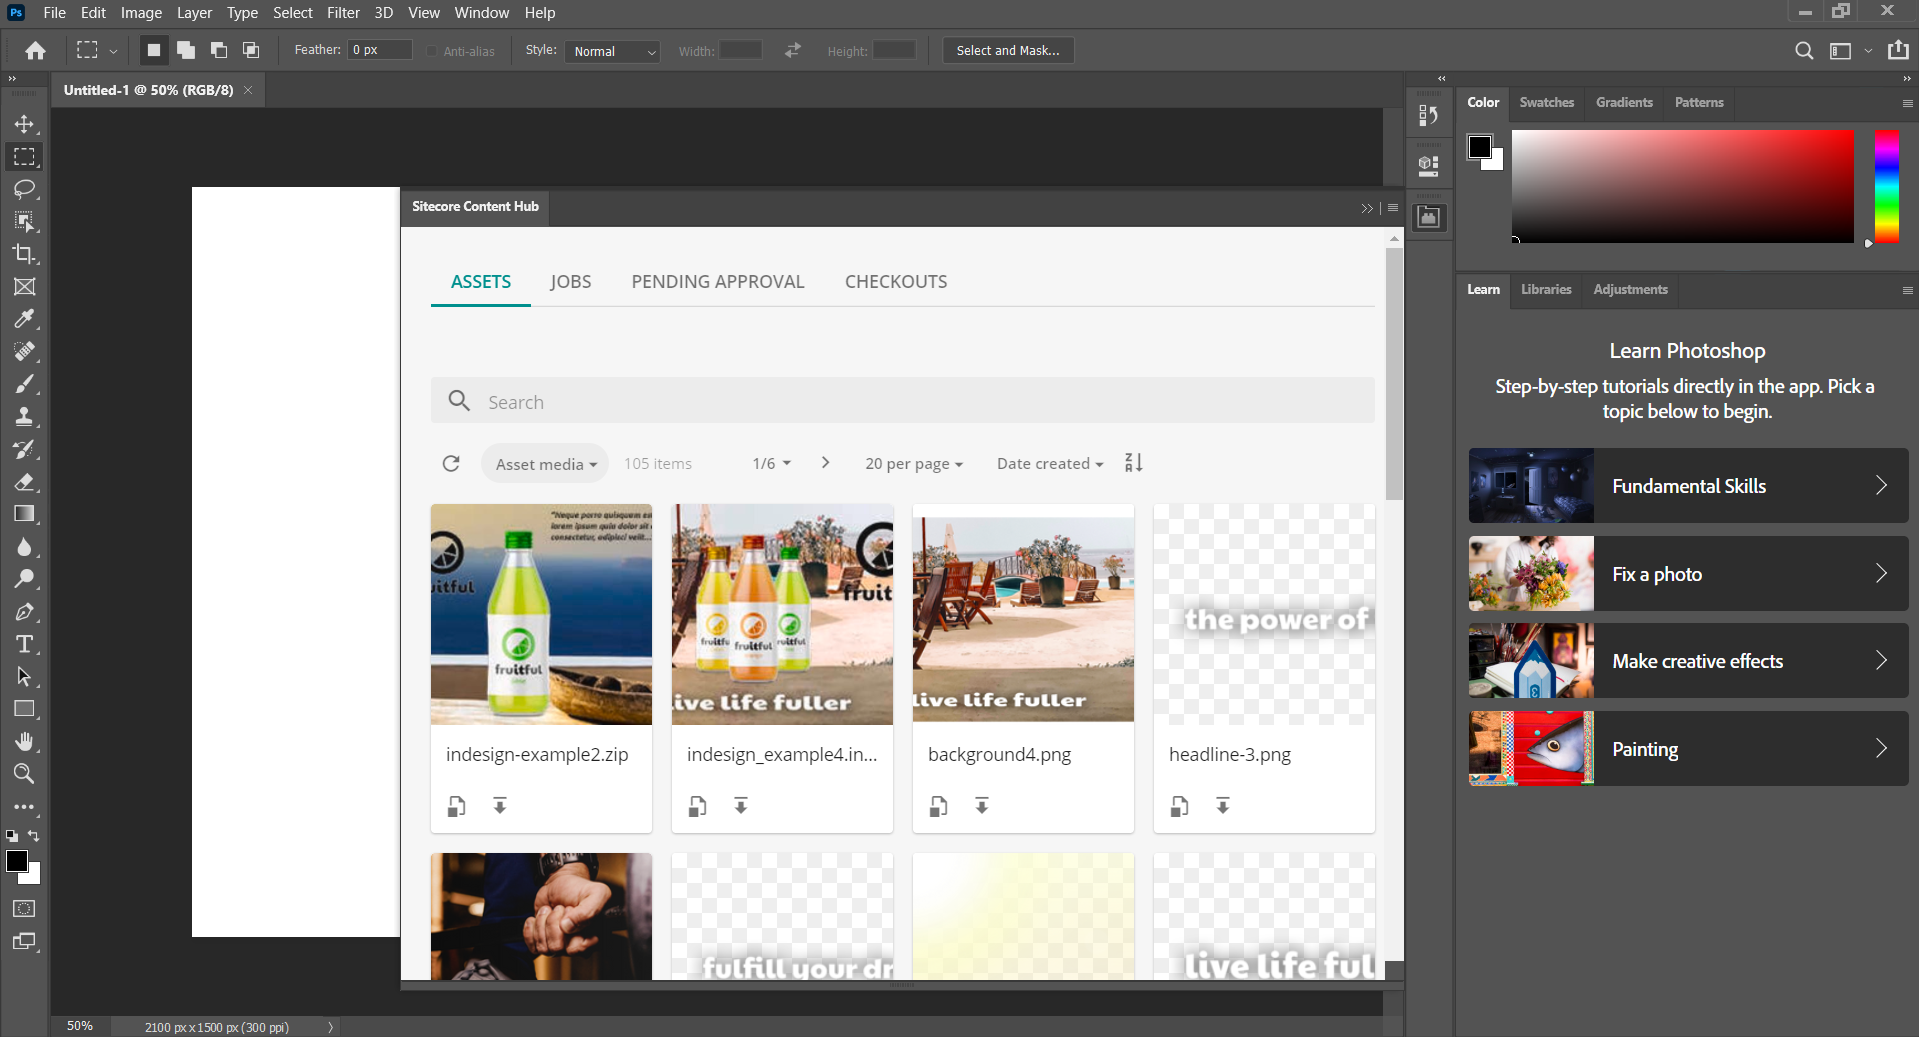 photoshop open with sitecore content hub modal: photoshop_sitecore_modal.png